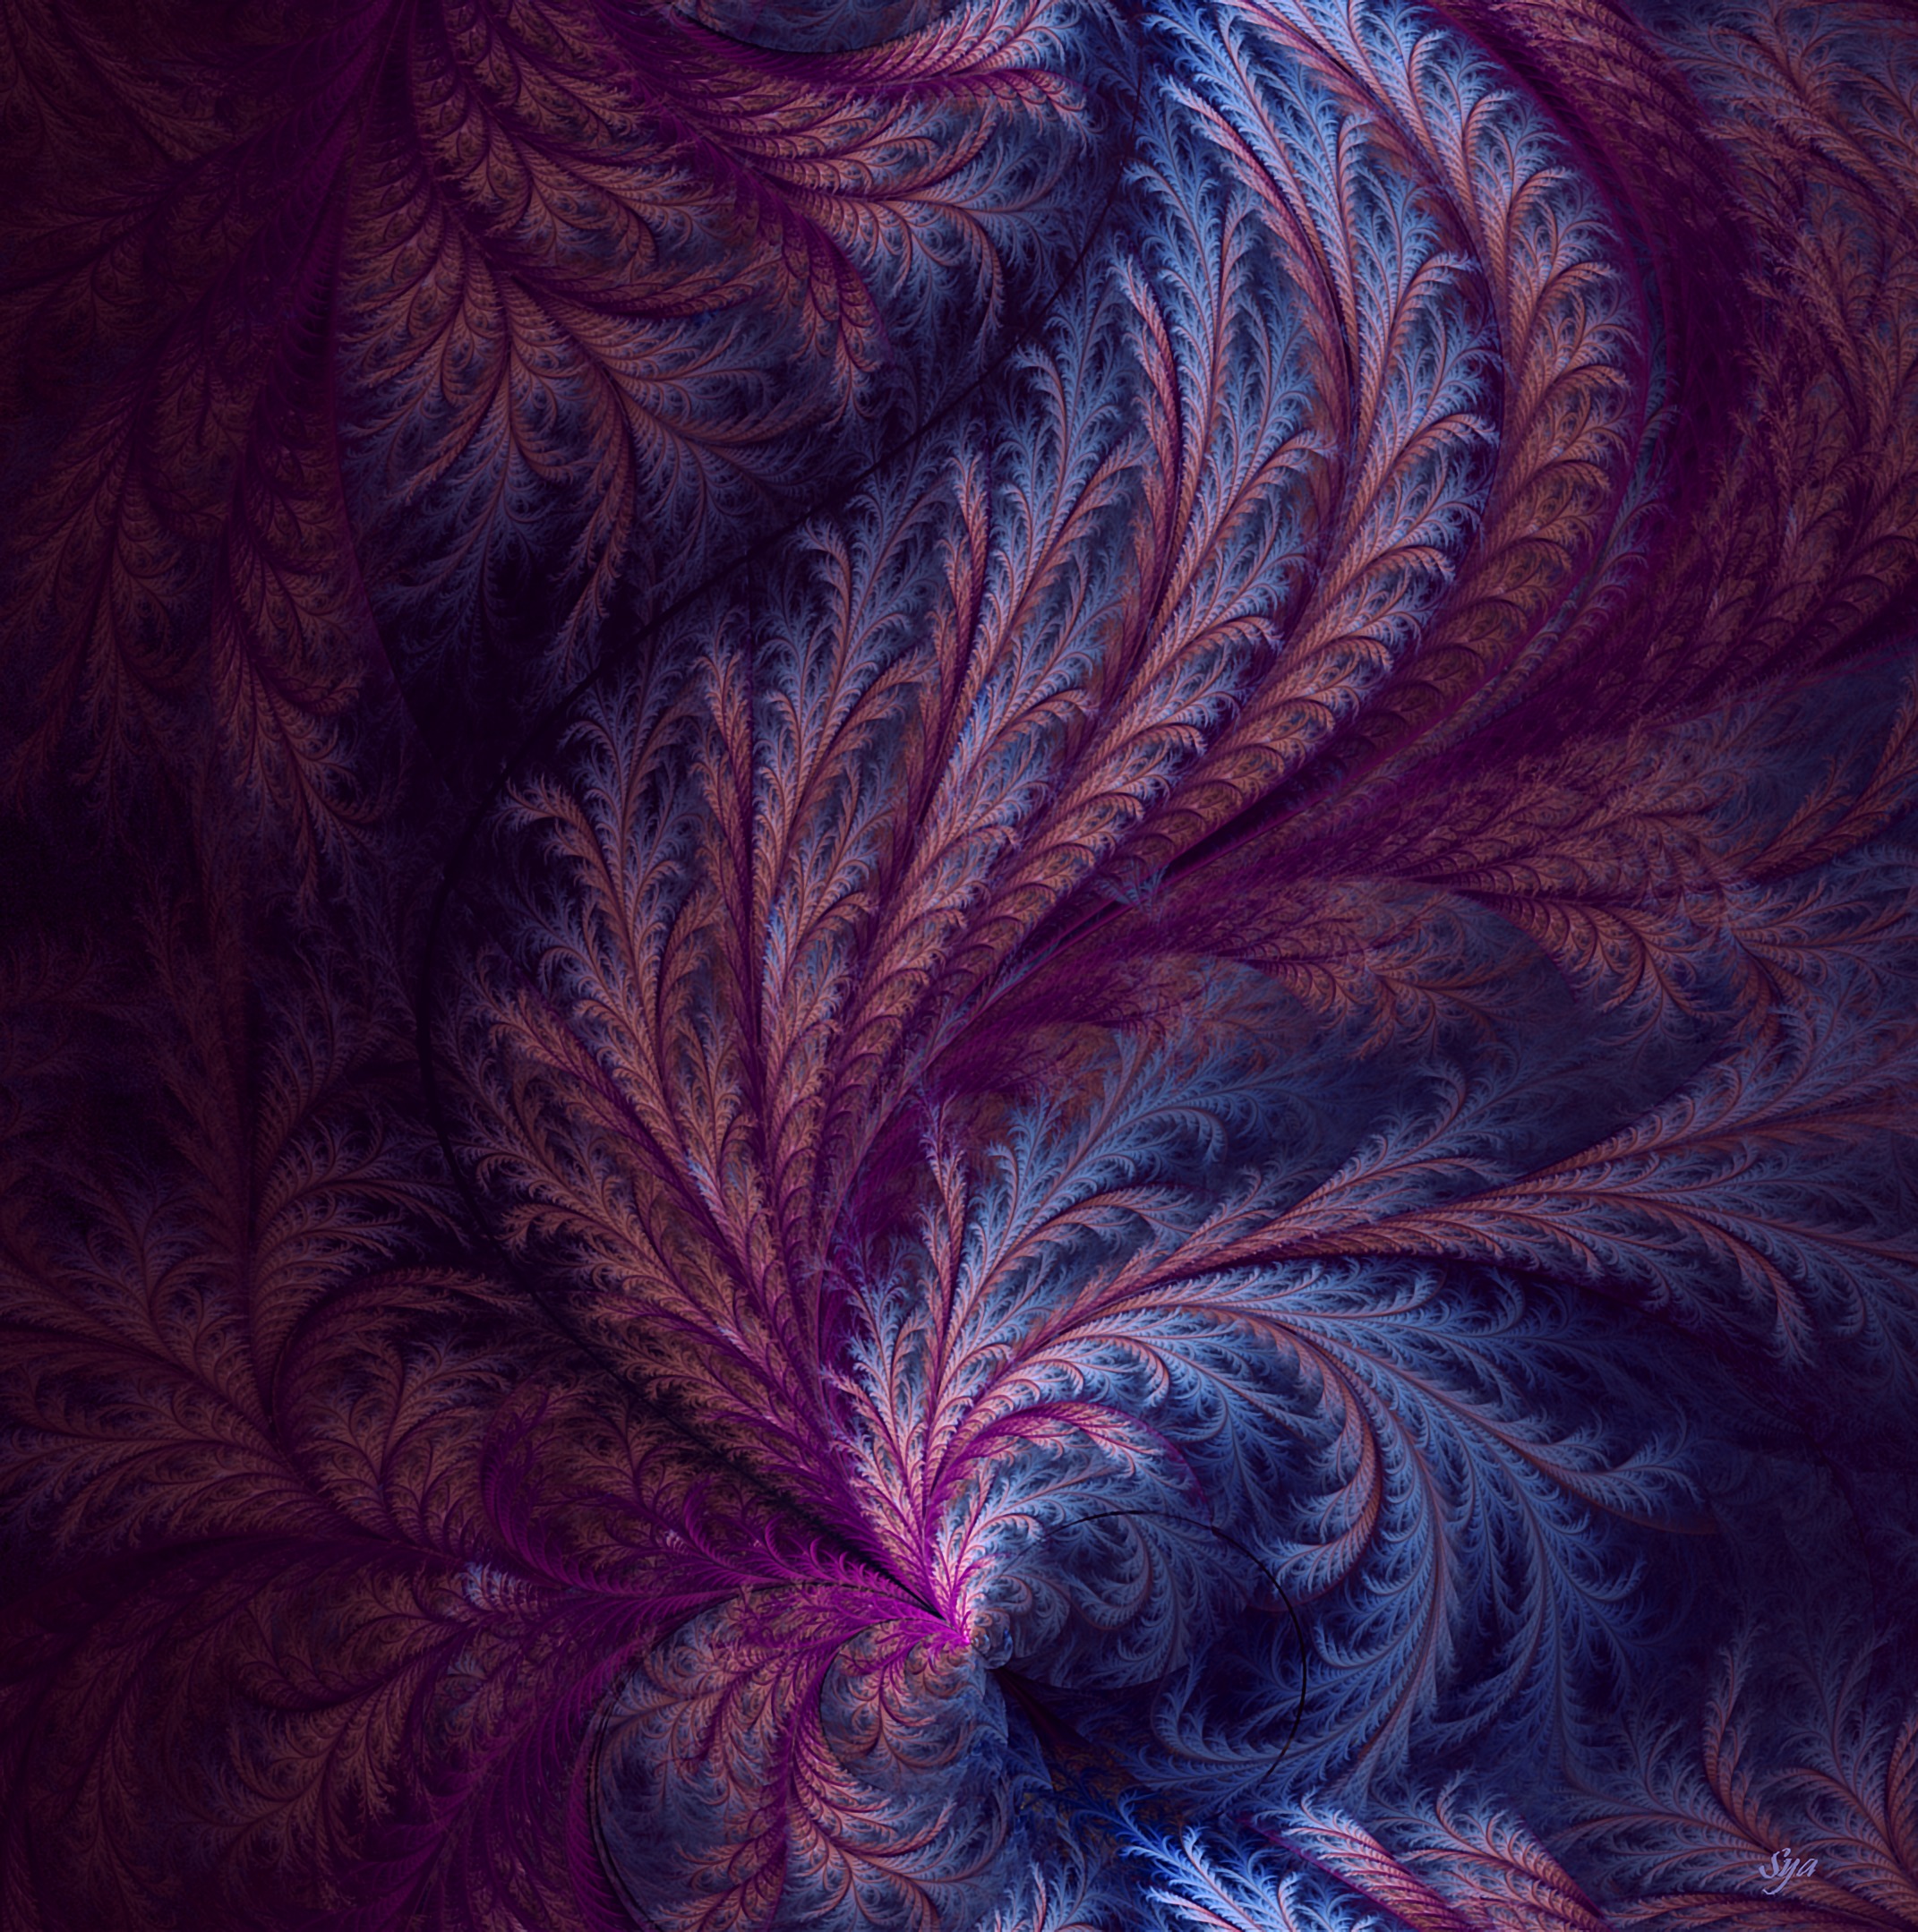 HD wallpaper fractal, confused, pattern, branchy, abstract, intricate, branched